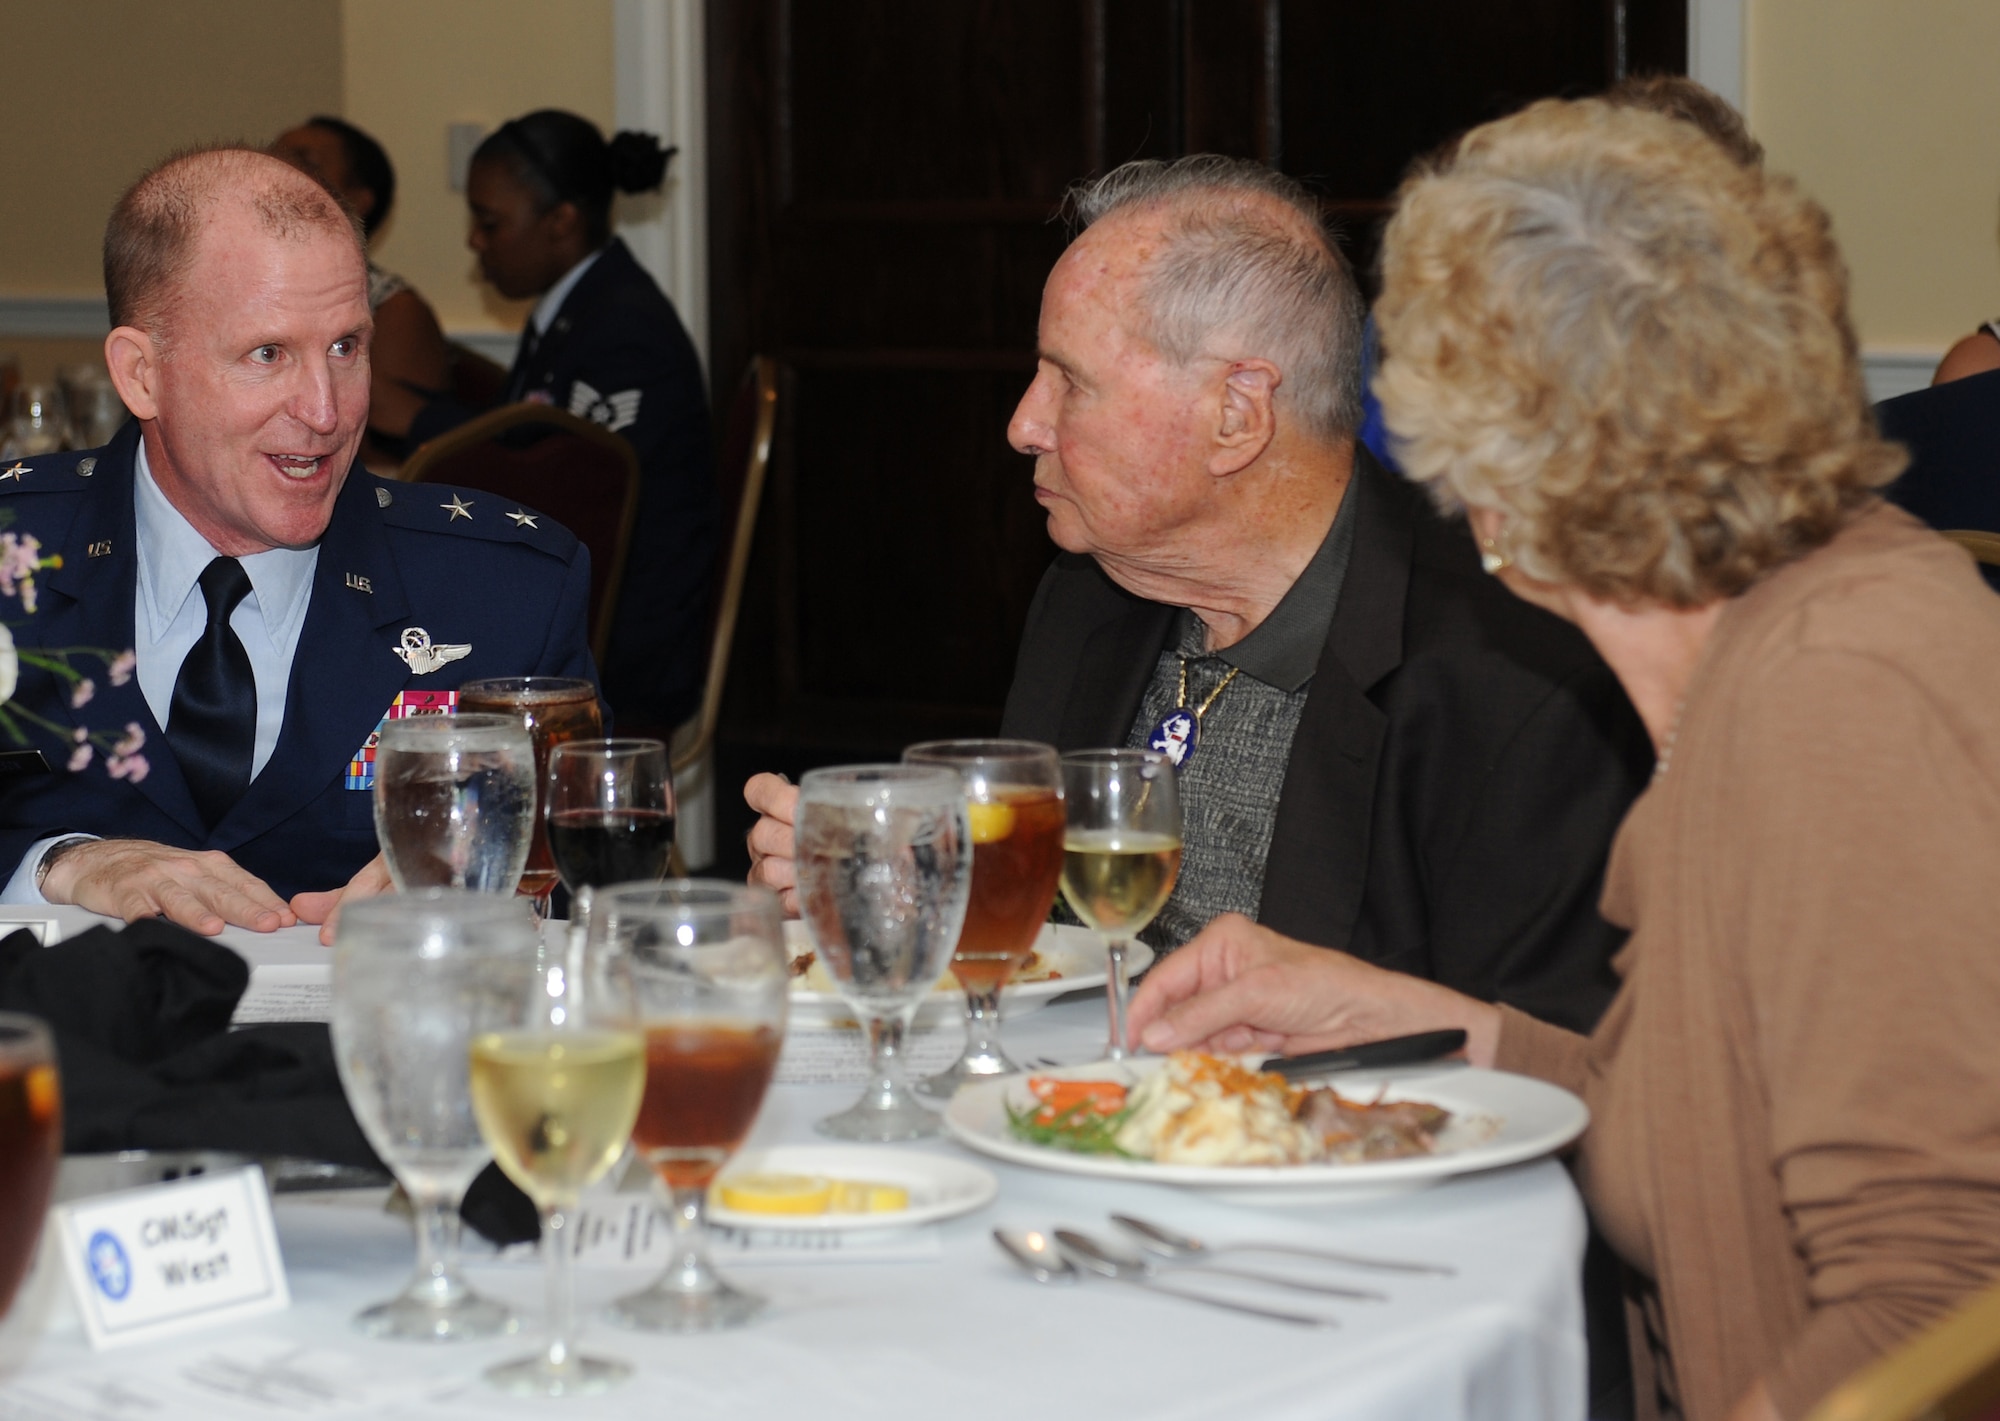 Maj. Gen. Stephen Wilson, 8th Air Force commander, speaks with Bataan Death March survivor Erwin Johnson during a dinner event at Boomtown Casino, Bossier City, La., Sept. 3. Johnson and four other former prisoners of war received medals on behalf of the Philippines for their sacrifice during the Bataan Death March. (U.S. Air Force photo/Airman 1st Class Benjamin Gonsier)(RELEASED)
